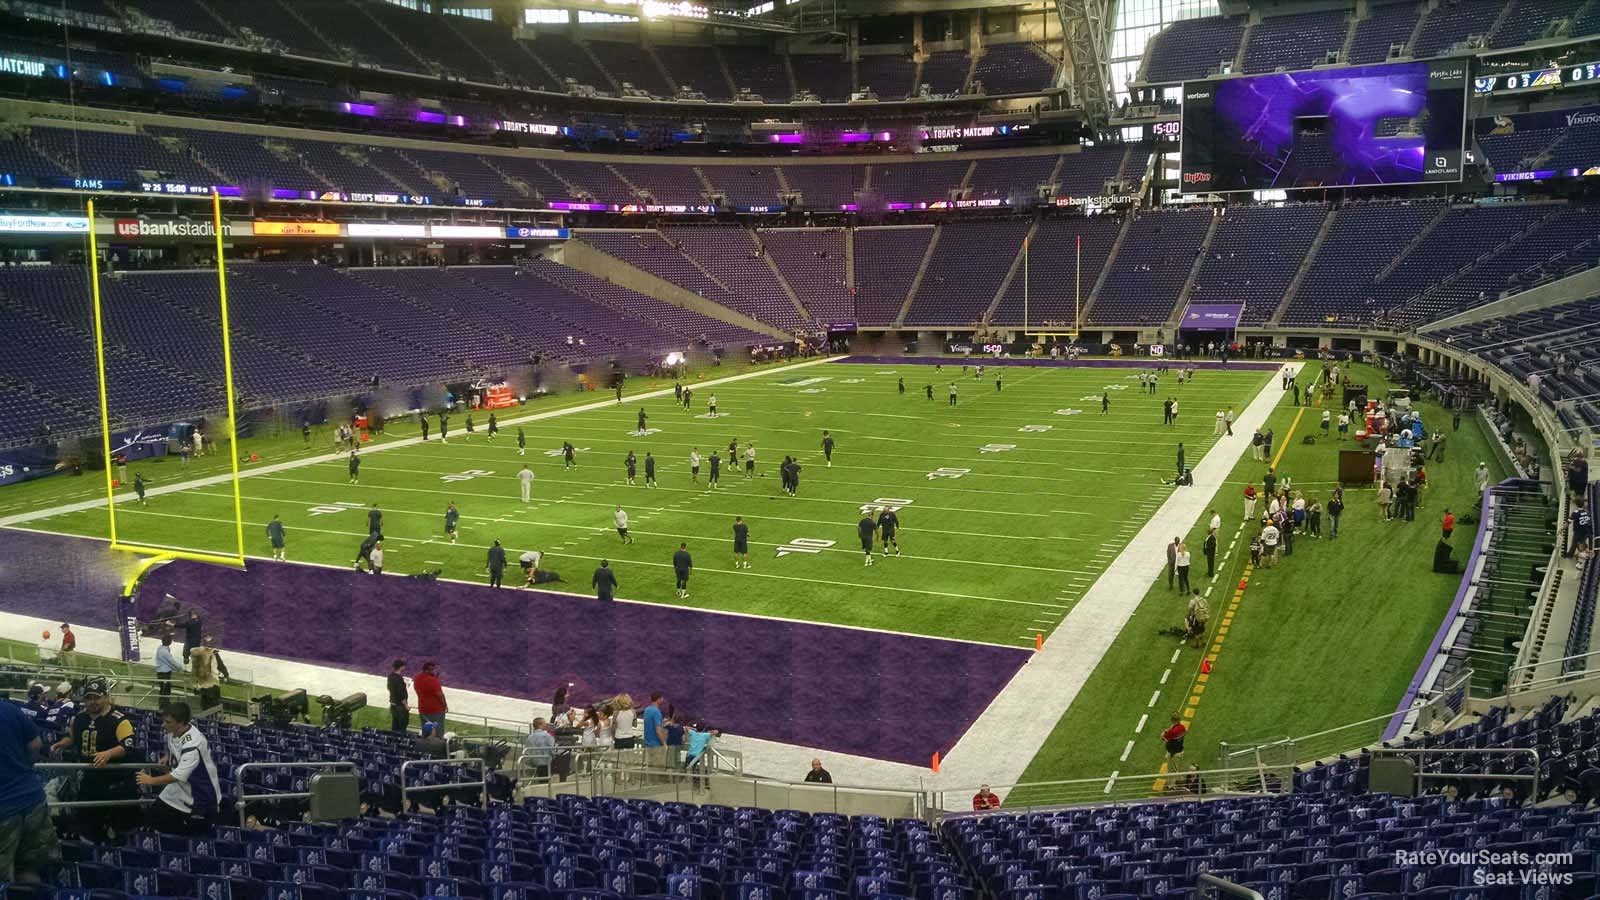 section 138, row 24 seat view  for football - u.s. bank stadium